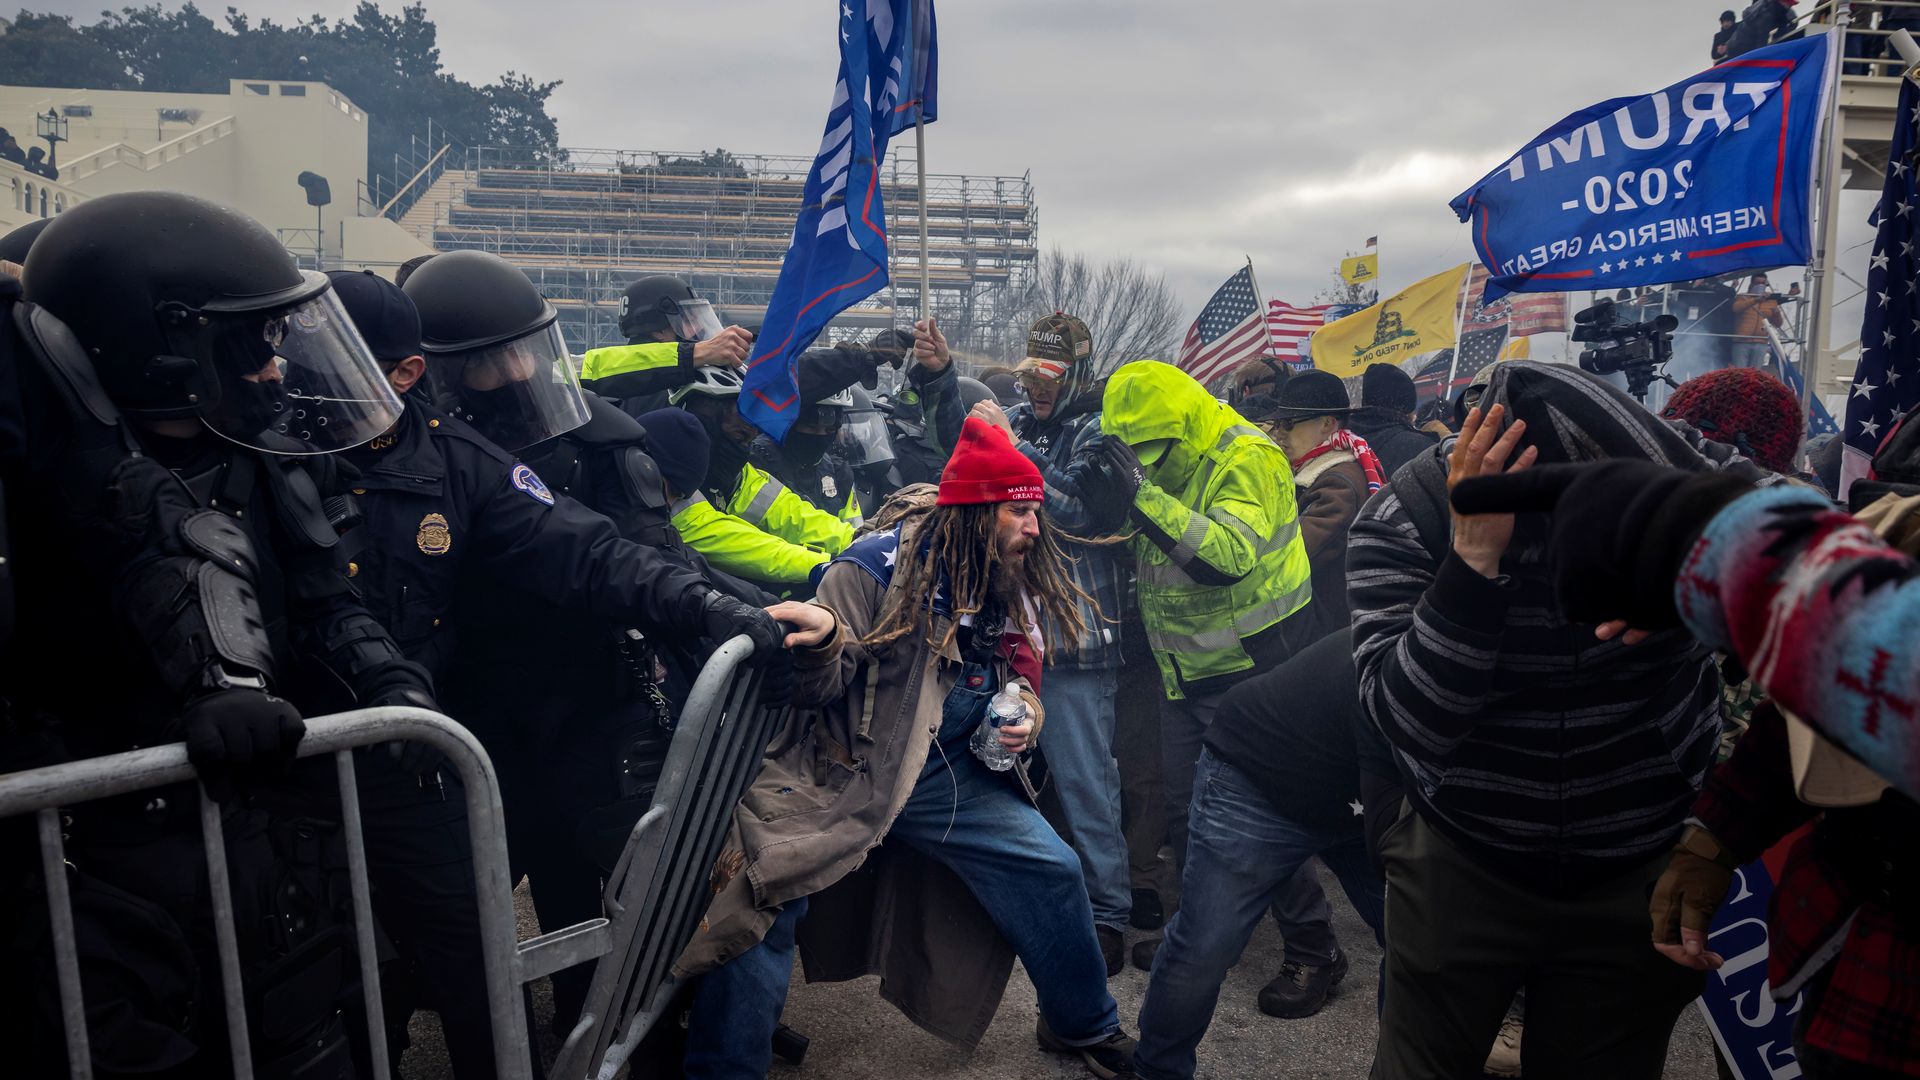 WASHINGTON, DC - JANUARY 6: Trump supporters clash with police and security forces as people try to storm the US Capitol on January 6, 2021 in Washington, DC.